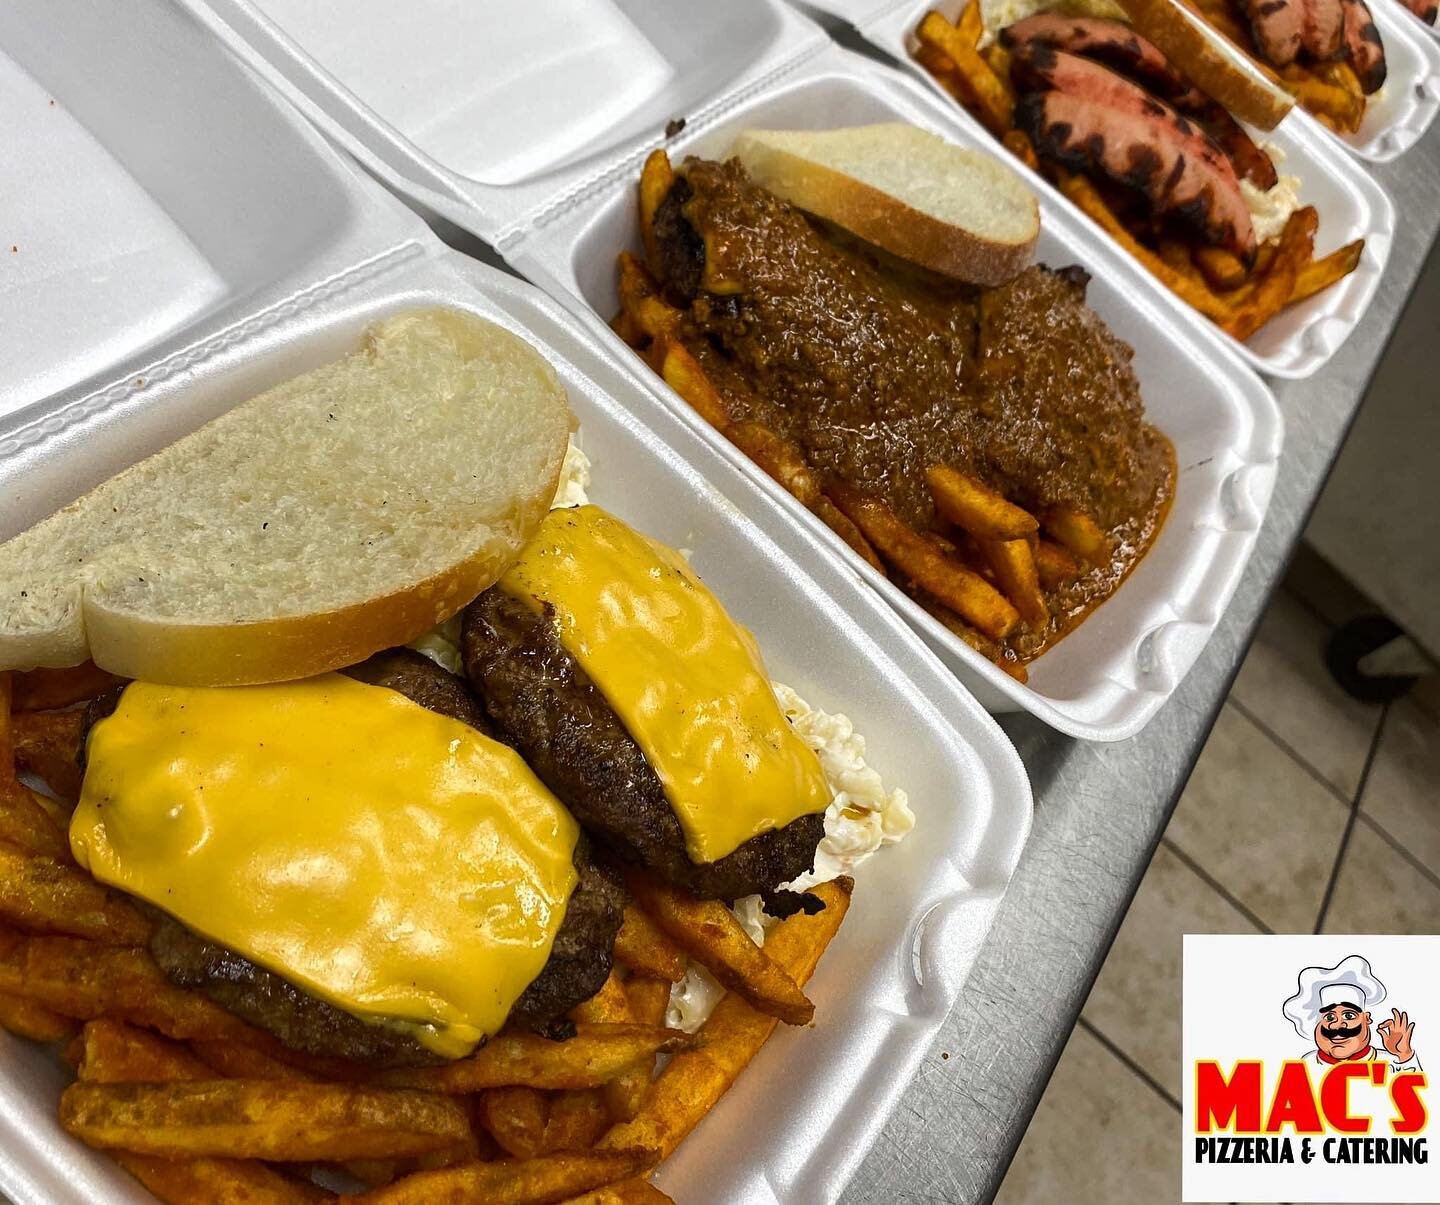 Today we have $7.50 Mac plates! Come down to 2346 Lyell ave or call 585-429-6227.